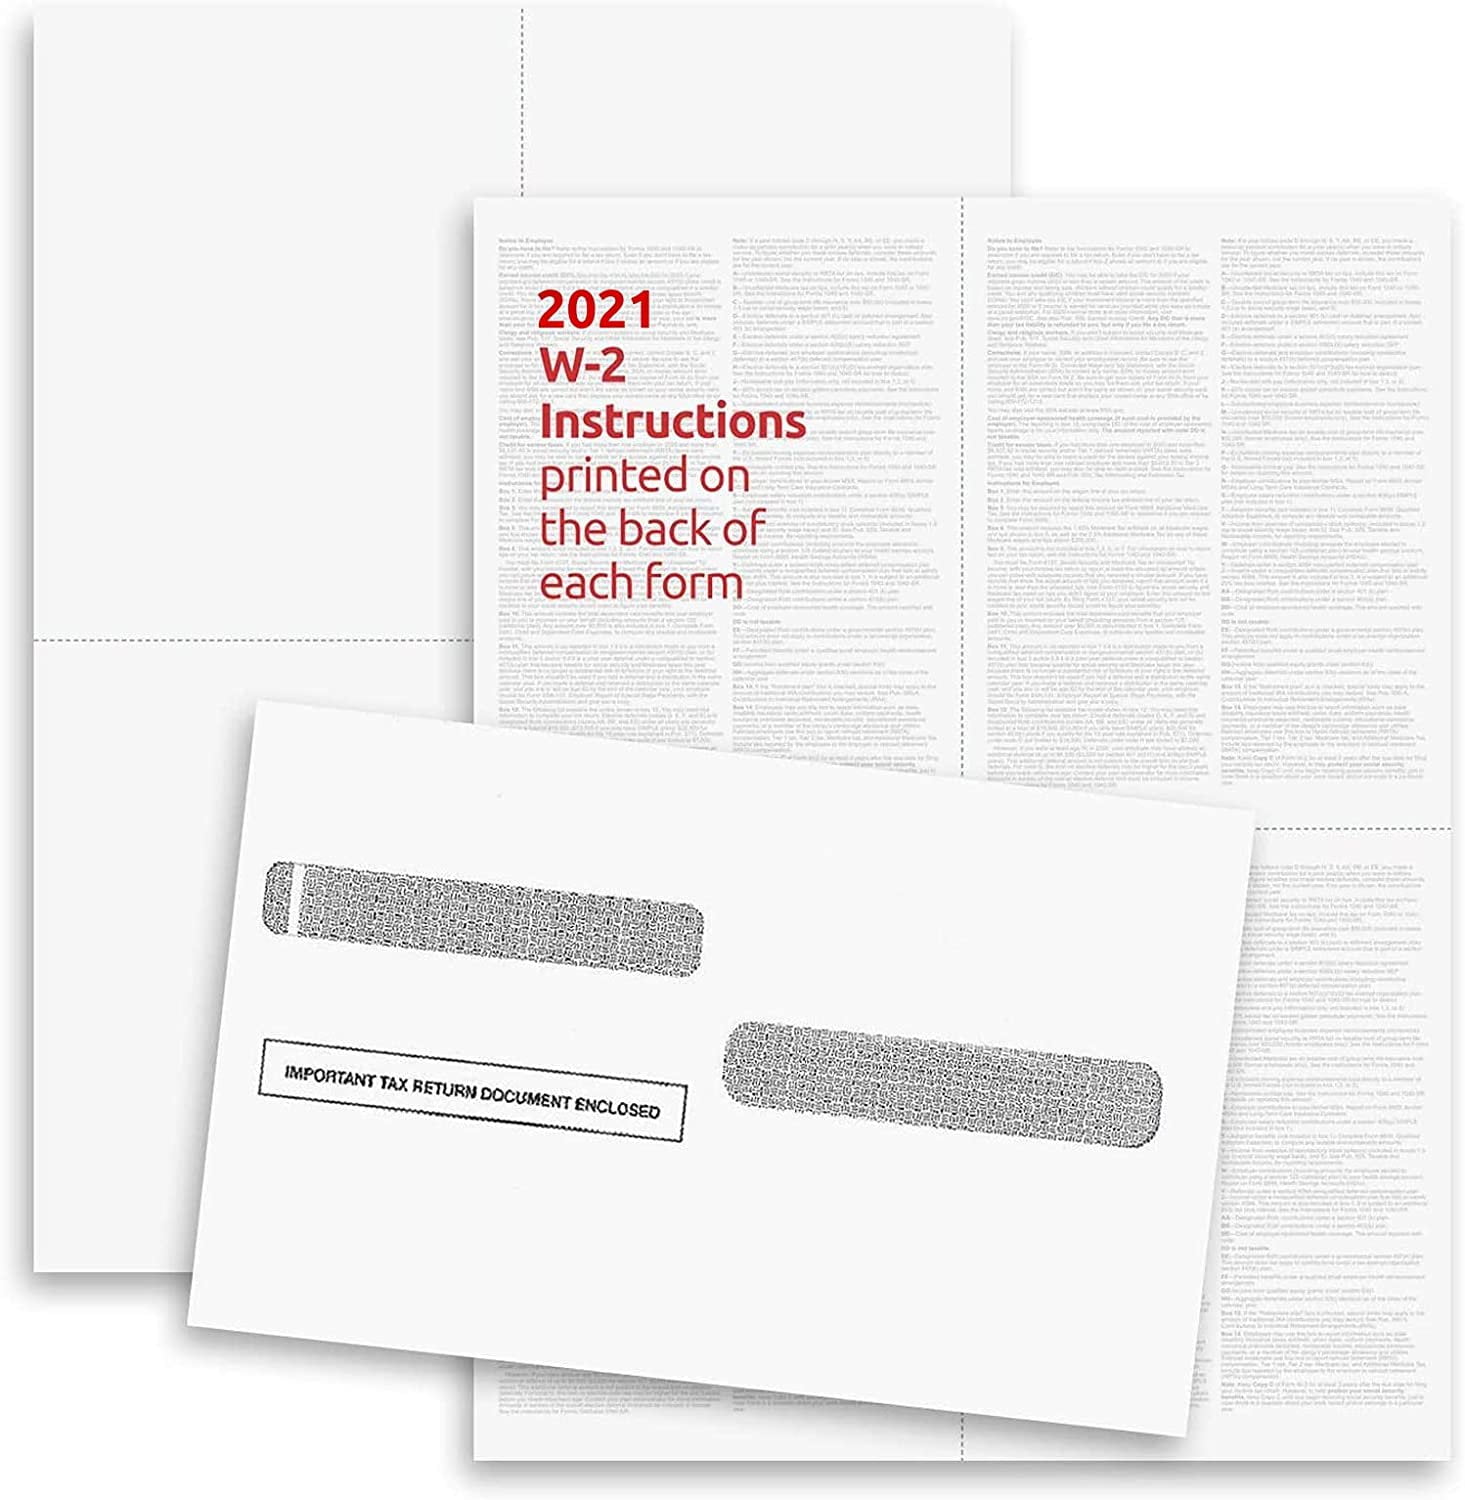 2021 W2 4 Part Tax Forms Kit 25 Employee Kit of Laser Tax Forms Designed for QuickBooks and Accounting Software 